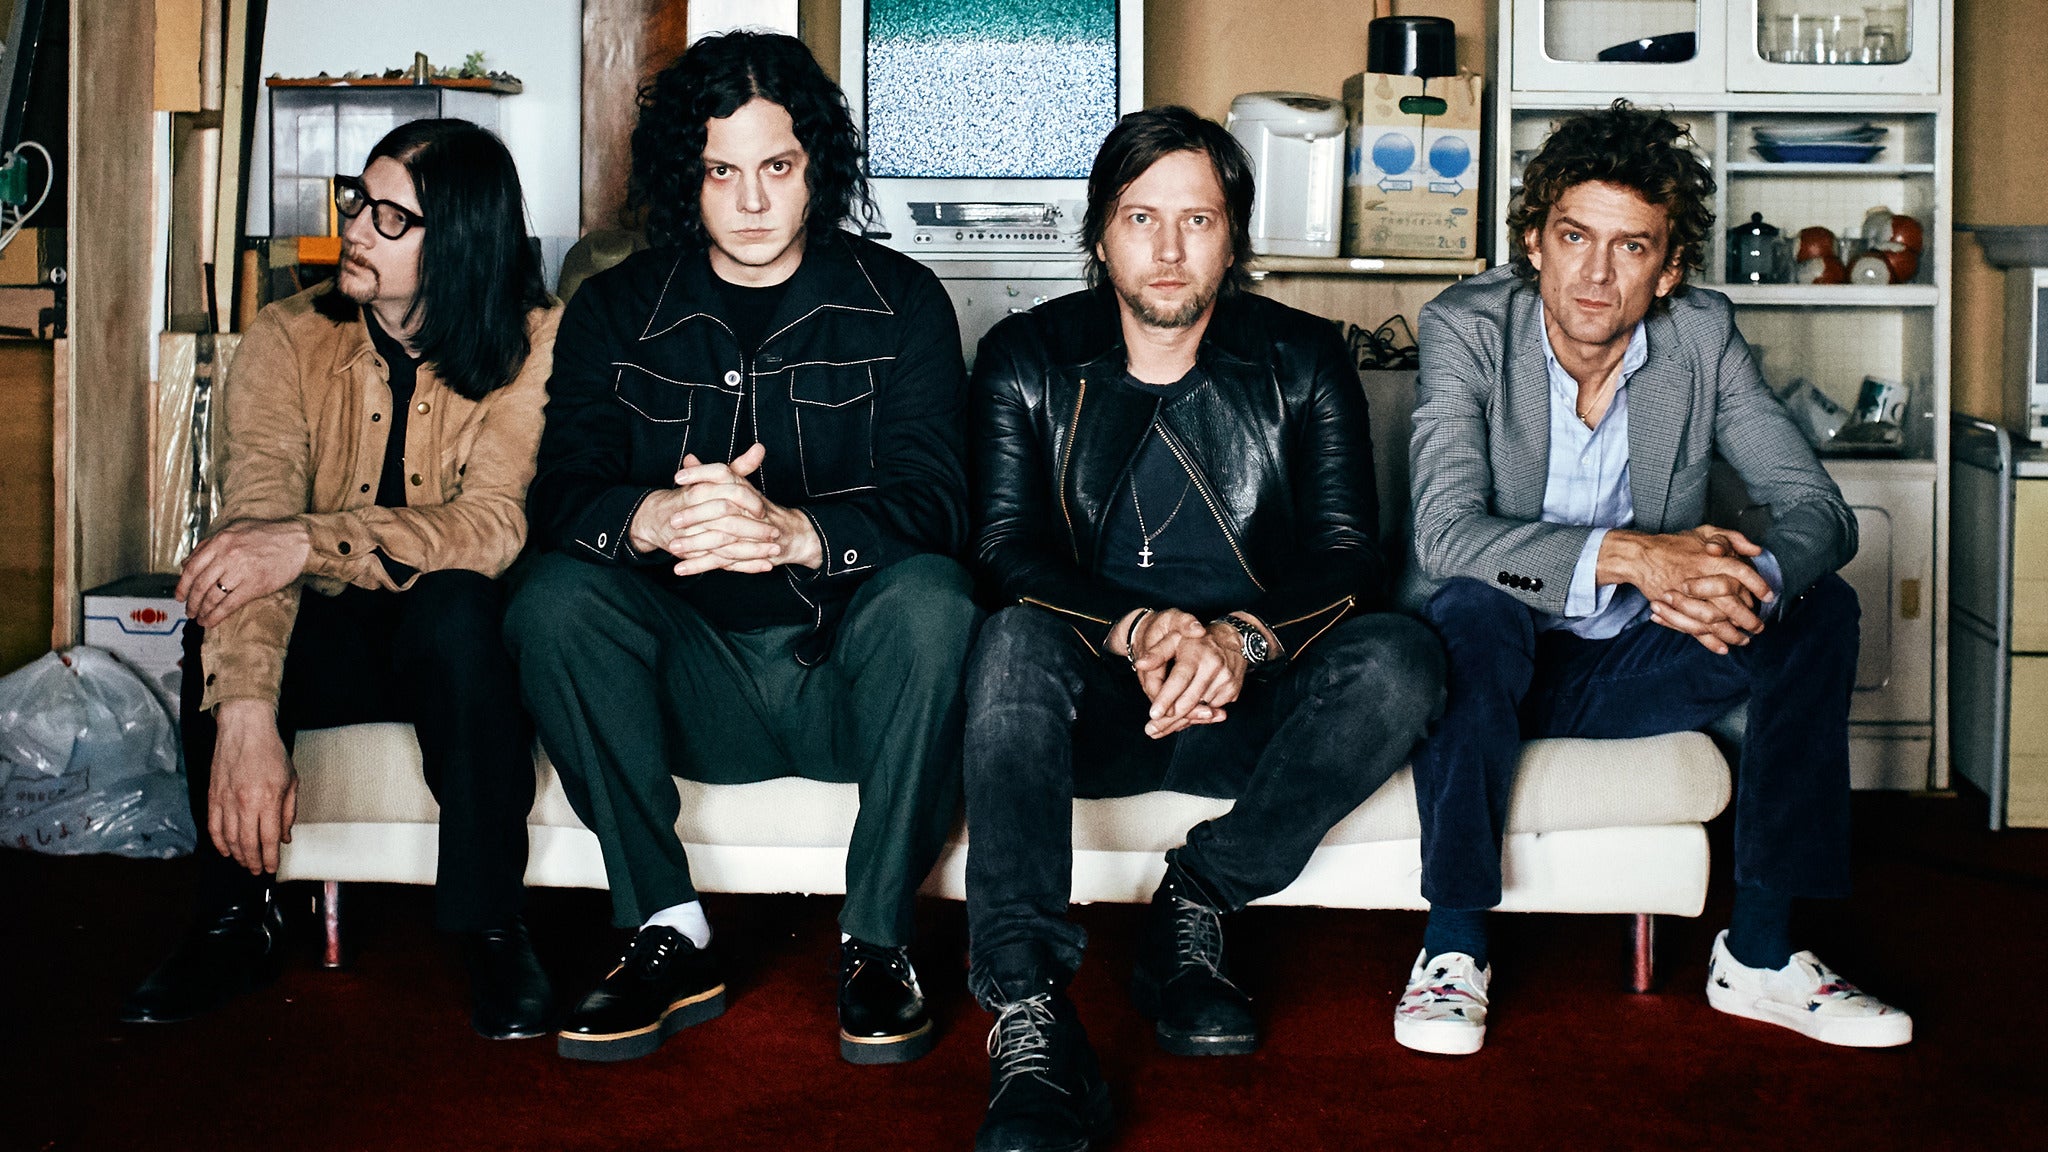 The Raconteurs in St Louis promo photo for American Express® Card Member presale offer code